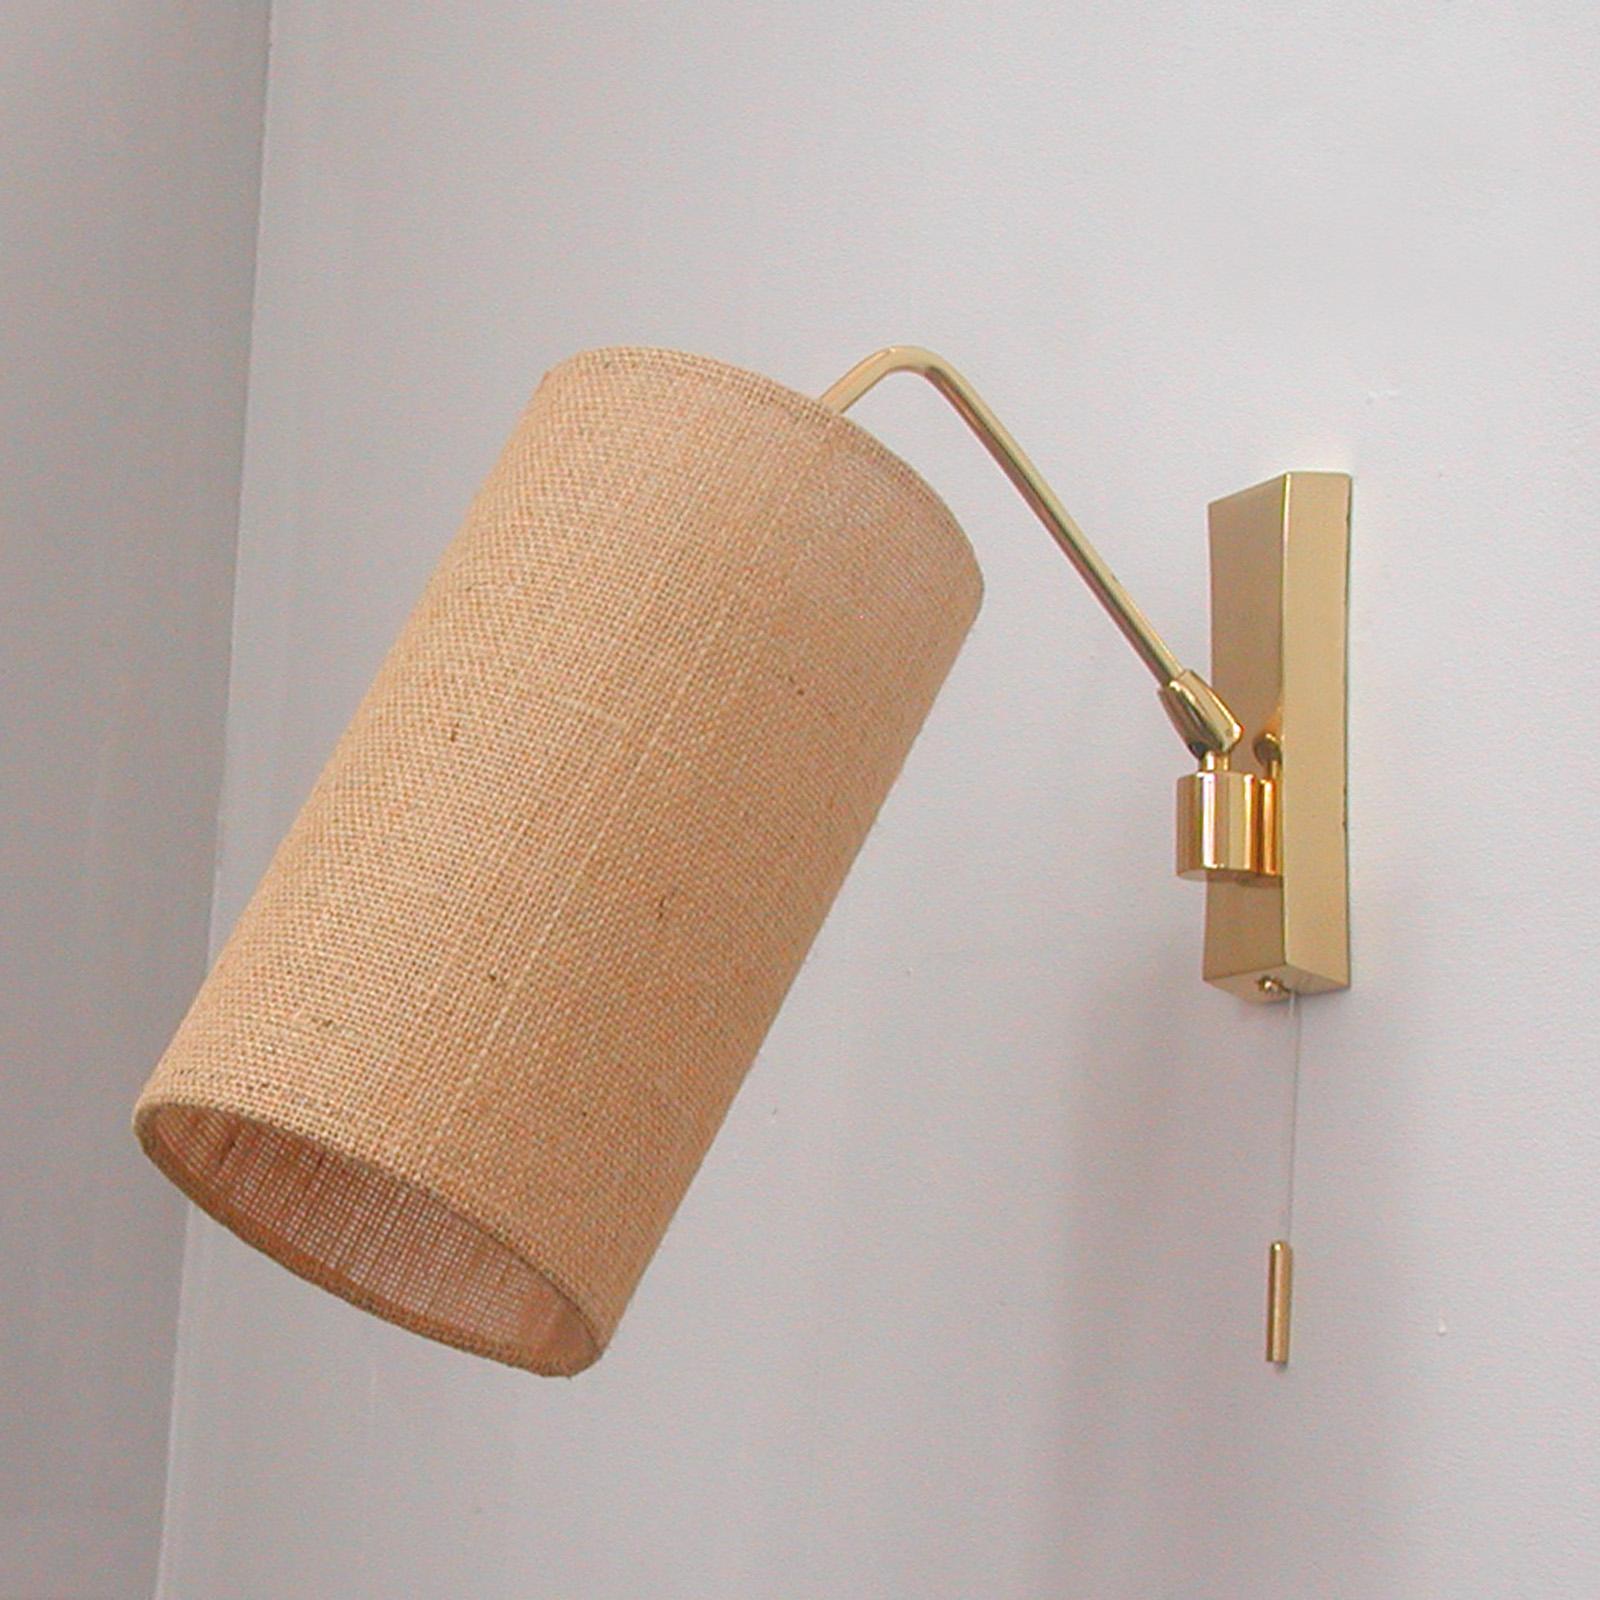 Midcentury Brass and Sisal Adjustable Sconce, Kalmar Attributed., Austria, 1960s For Sale 4